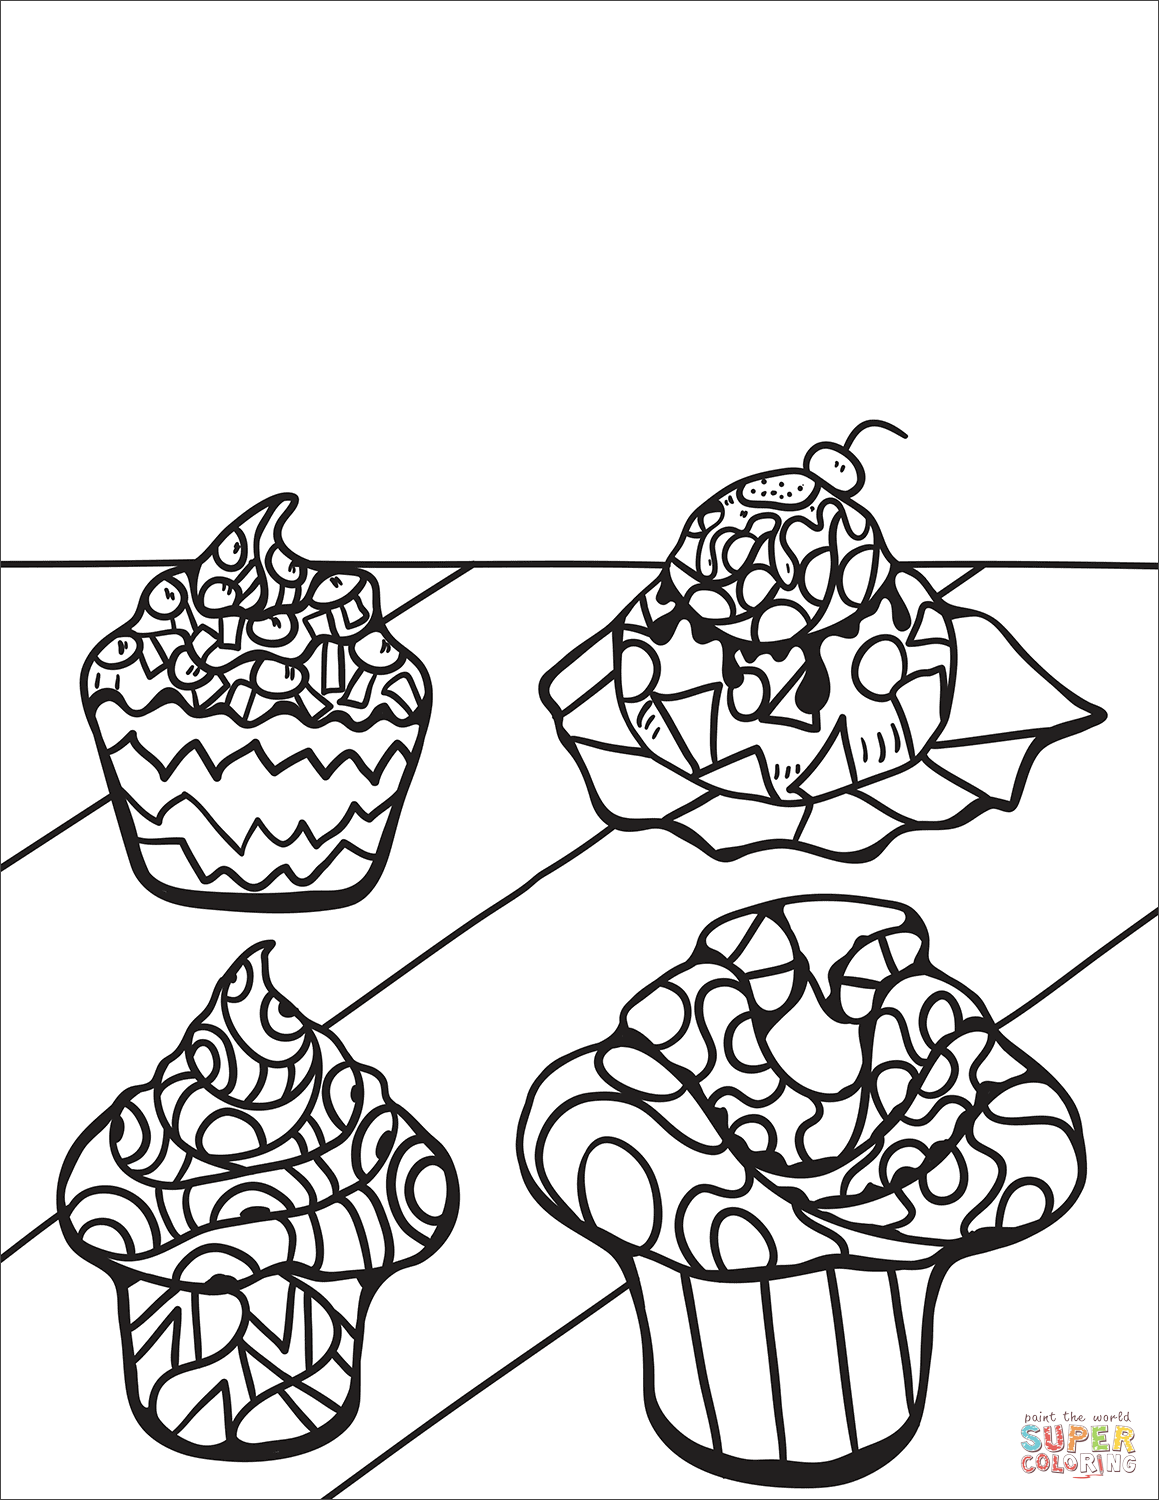 Zentangle cupcakes and muffins